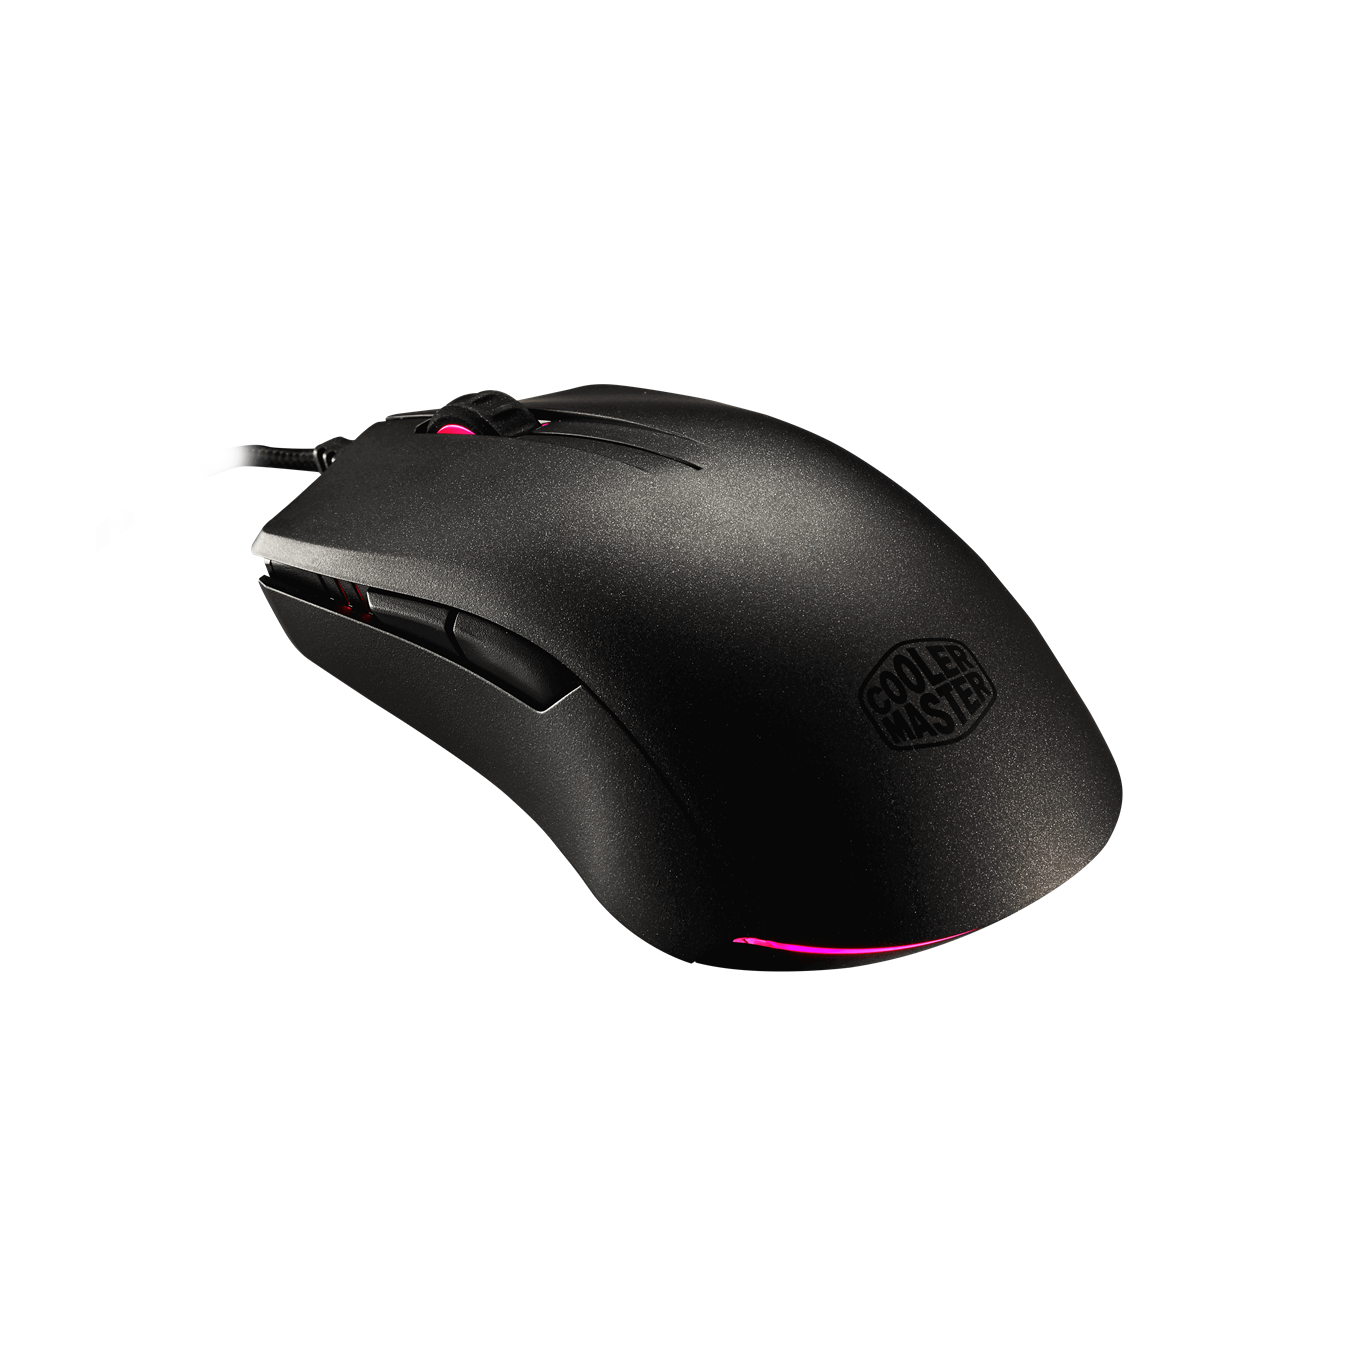 MasterMouse Pro L - Extra top cover and side panels givea perfect balance between claw and palm grips.